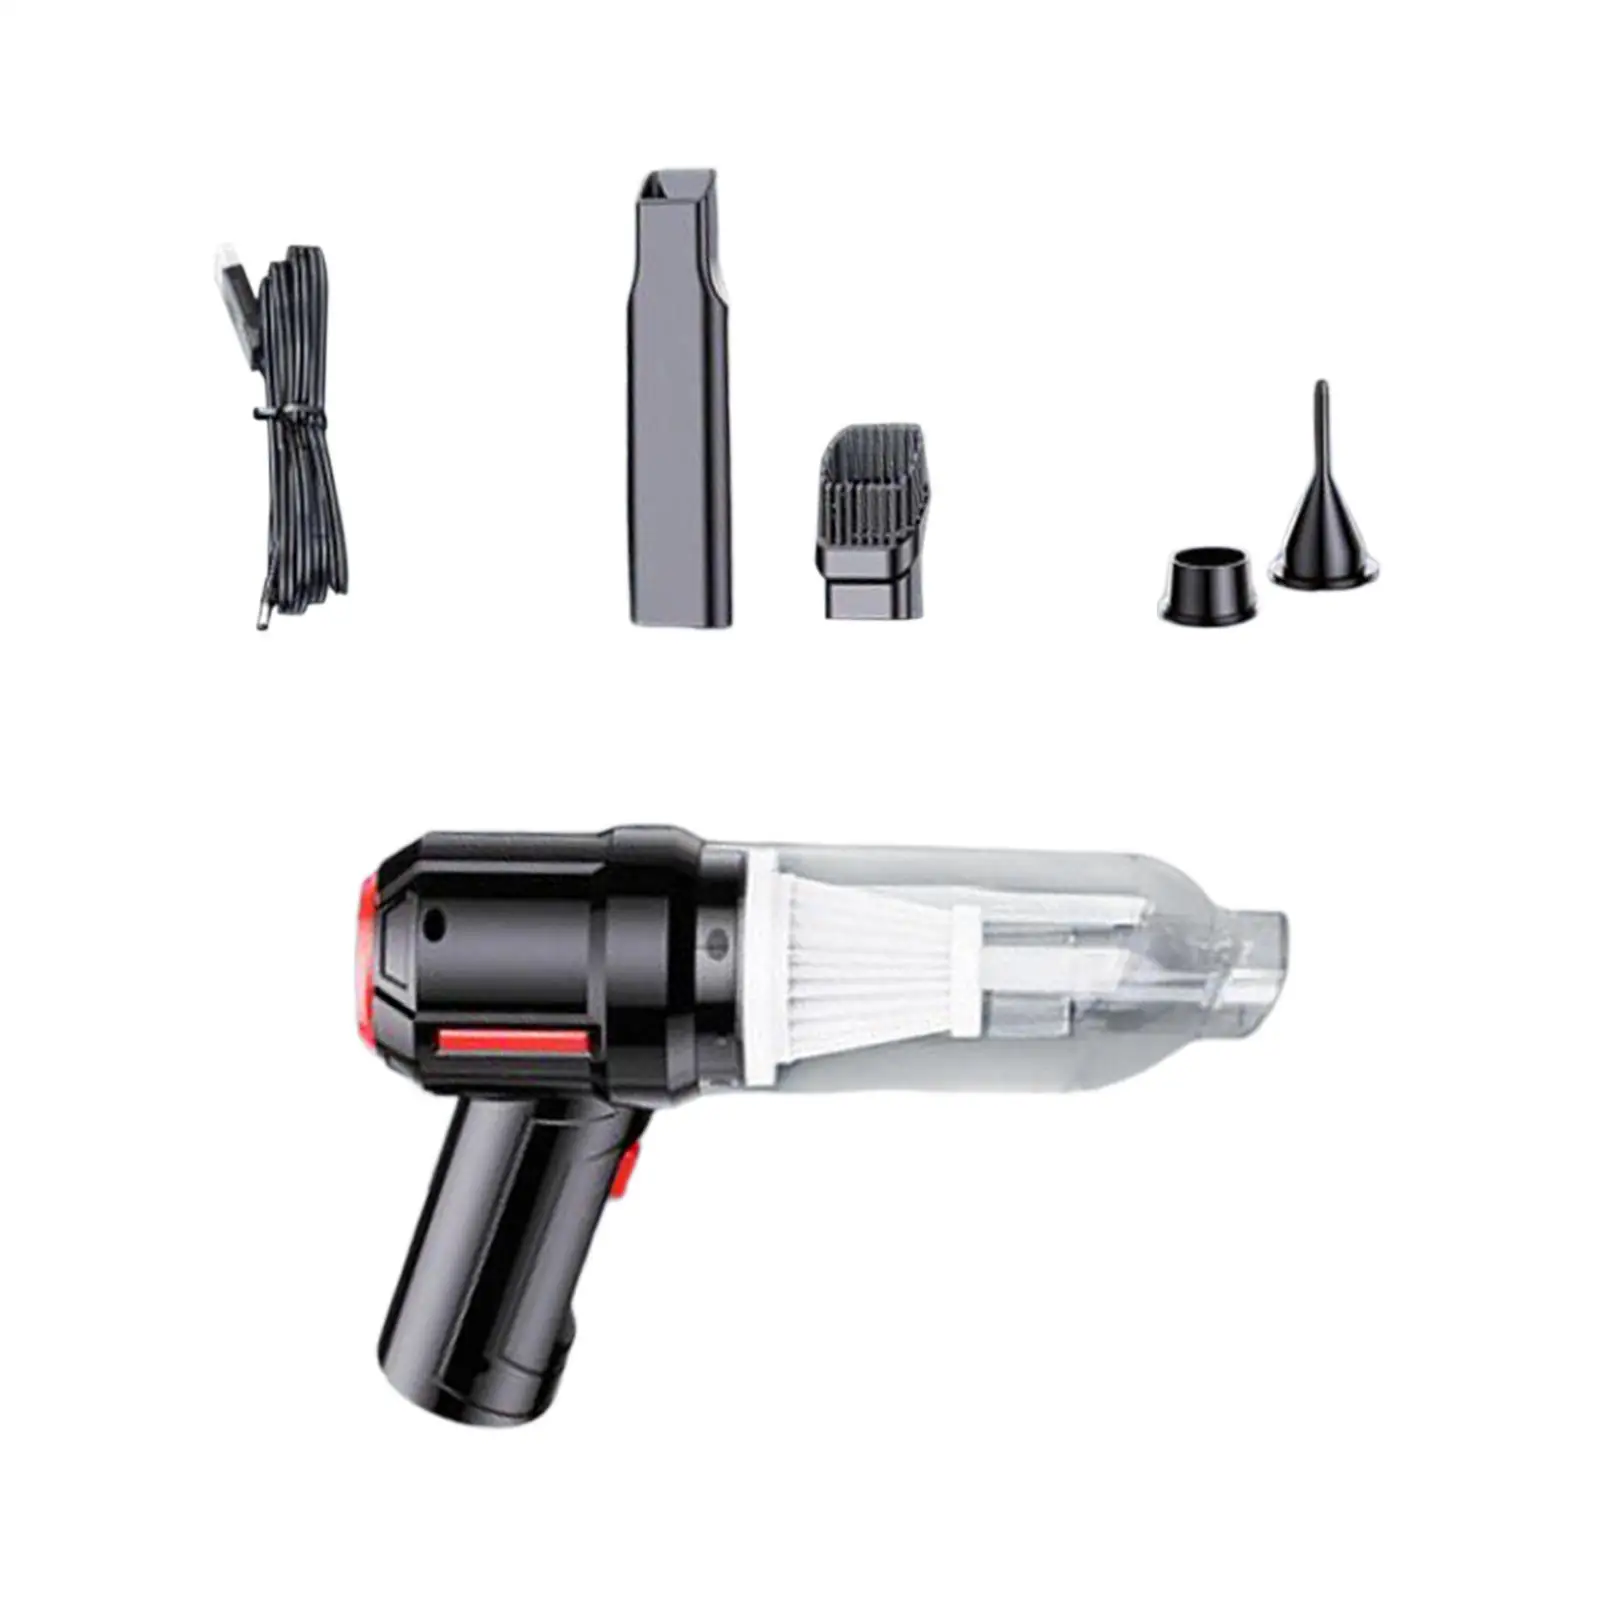 Mini Cordless Handheld Vacuum Cleaner Rechargeable Washable Filtration for